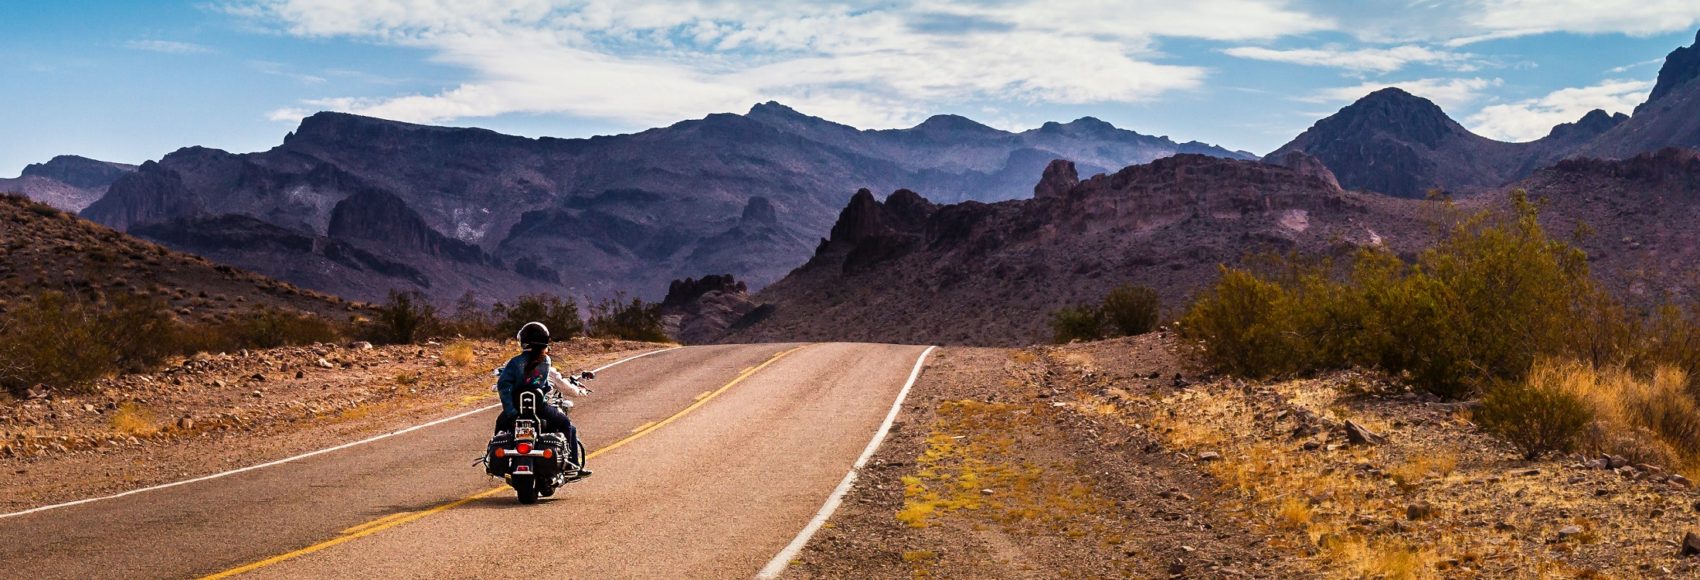 Route 66 motorcycle tour